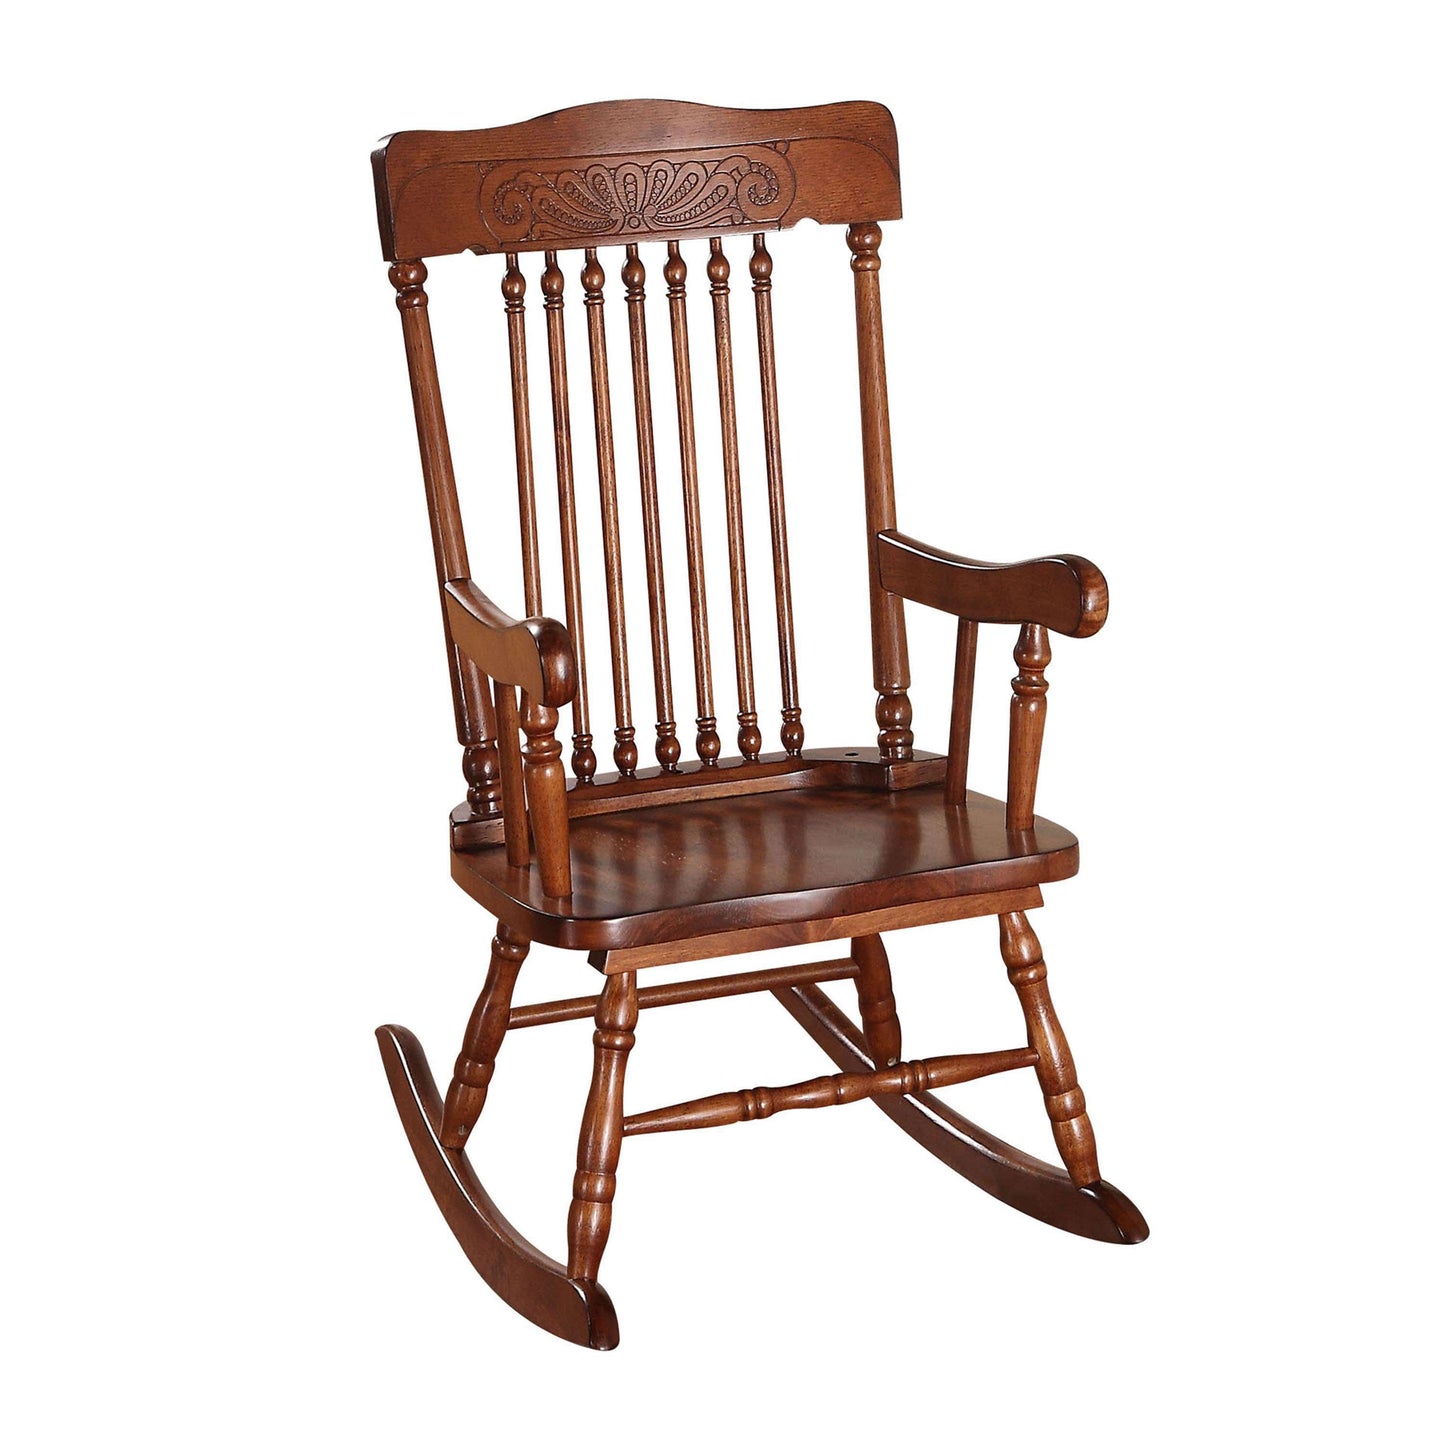 ACME Kloris Youth Rocking Chair in Tobacco